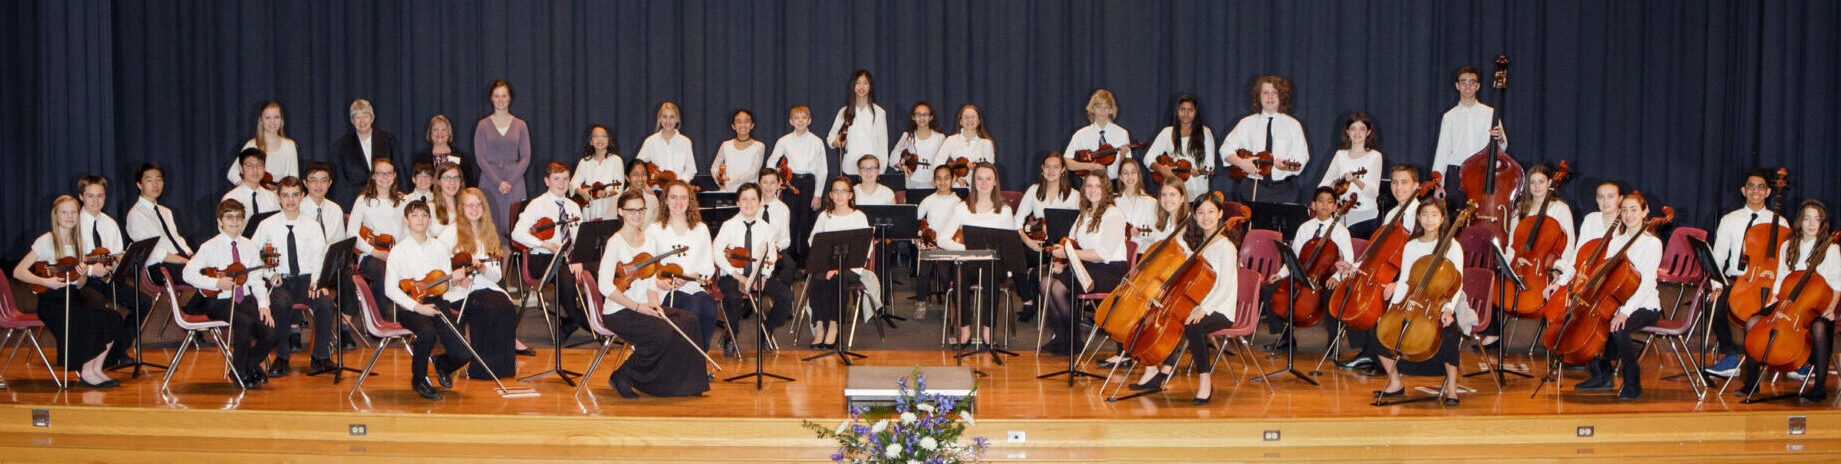 Hershey Symphony Festival Strings youth orchestra on stage